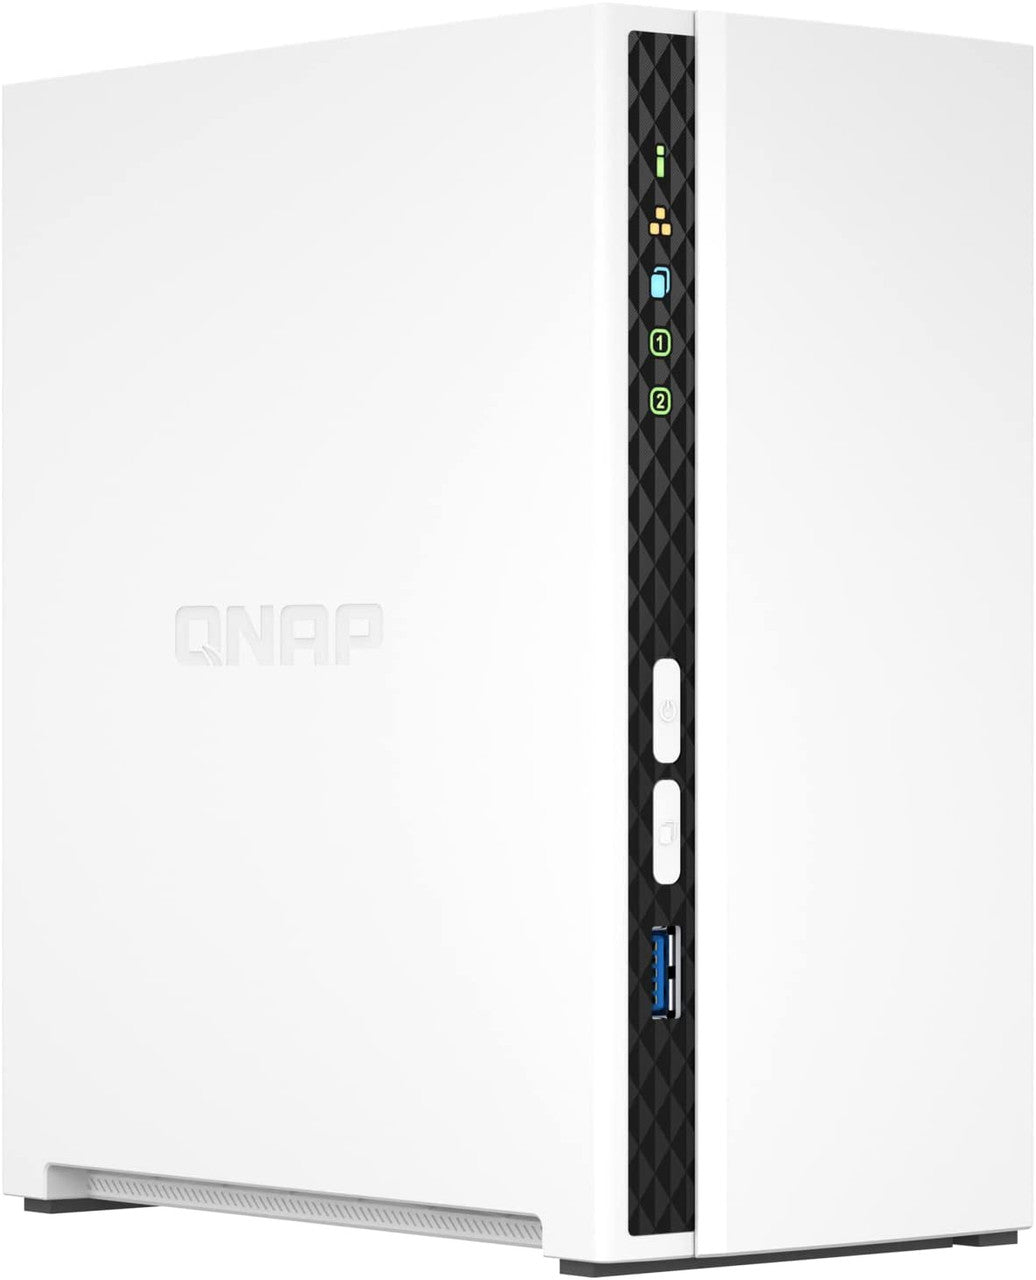 QNAP TS-233 2-Bay Desktop NAS with a 6TB (2 x 3TB) of Seagate Ironwolf NAS Drives Fully Assembled and Tested